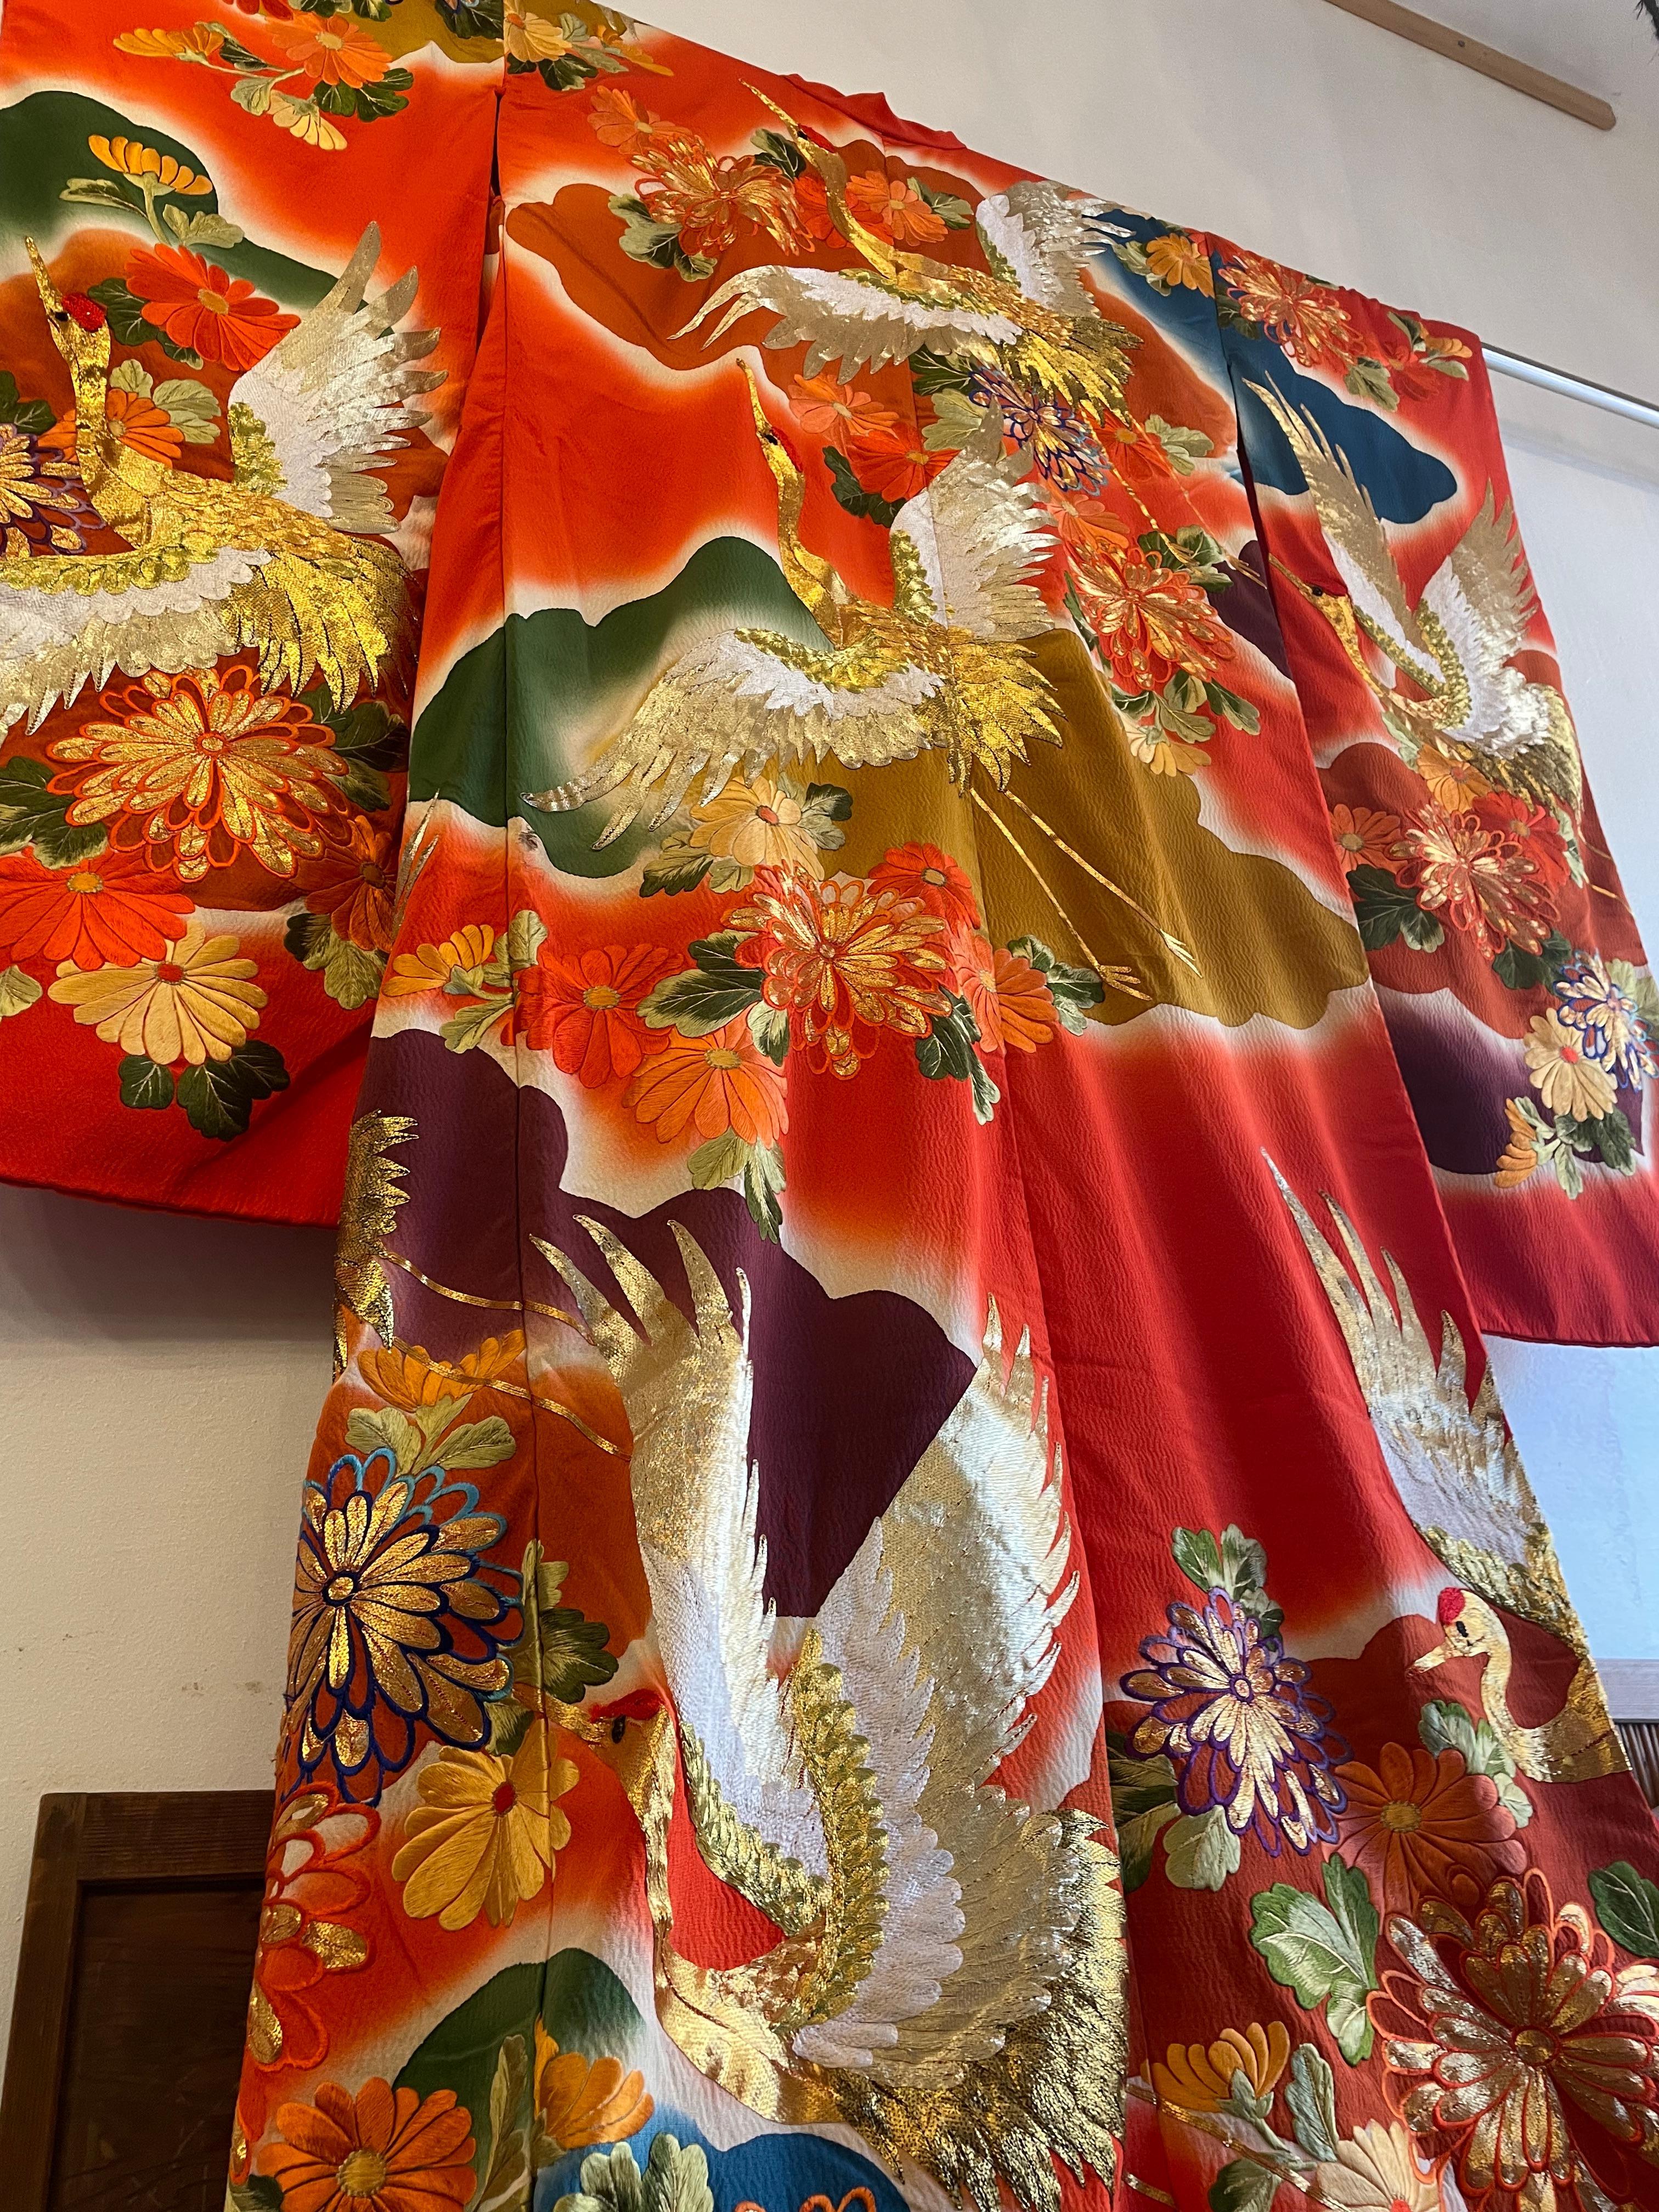 This is a kimono called Uchikake which Japanese women wear for wedding ceremony.
It is said that the women wear the white uchikake for the reason of 'they can dyed in any color' and the red uchikake 'represent blood of the brides family'.
This